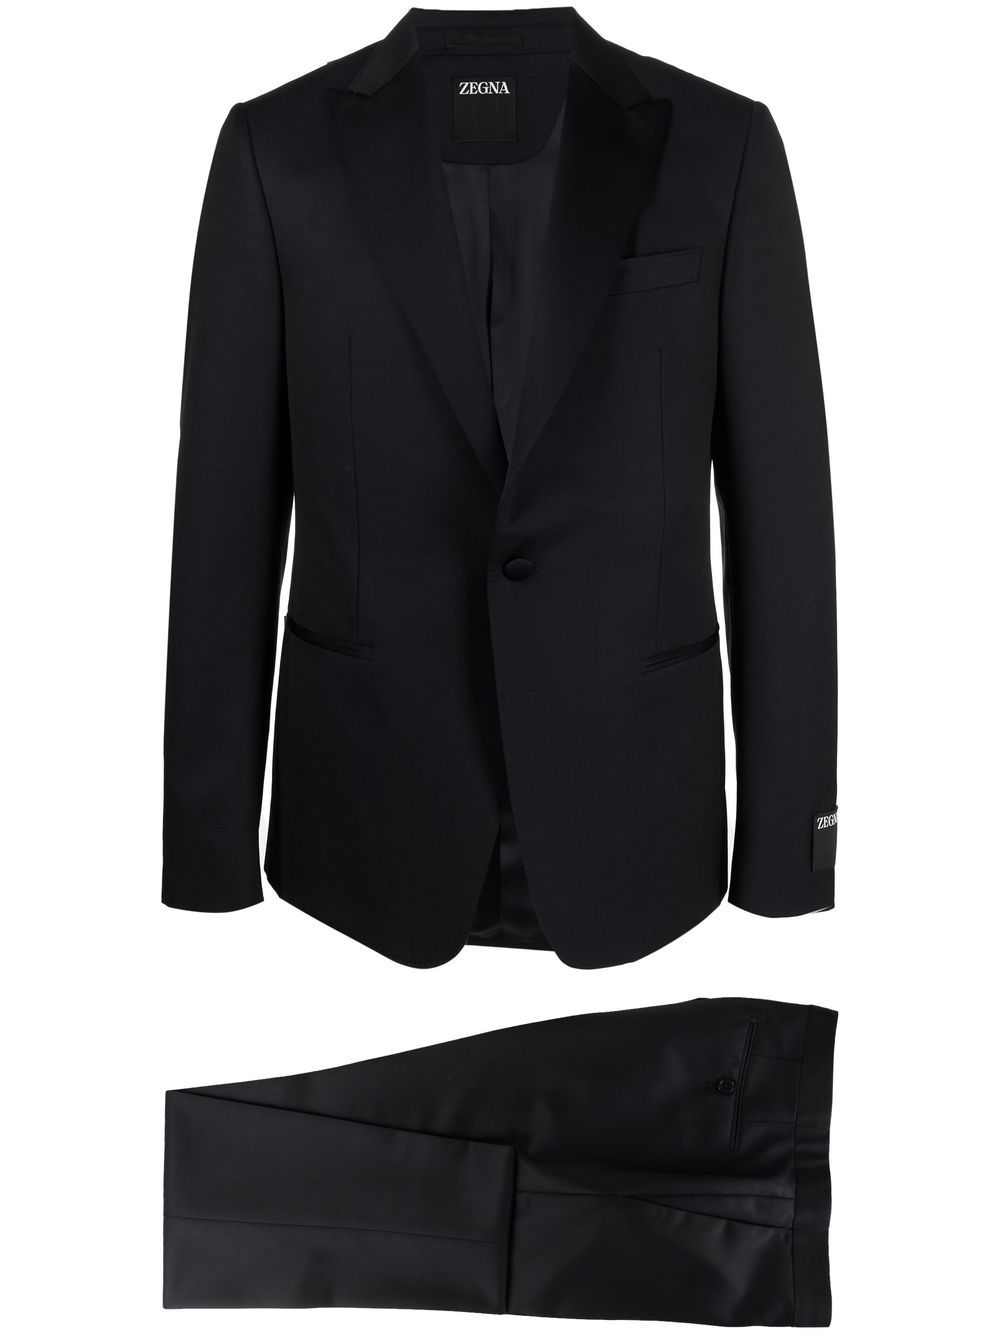 ZEGNA SINGLE-BREASTED SUIT